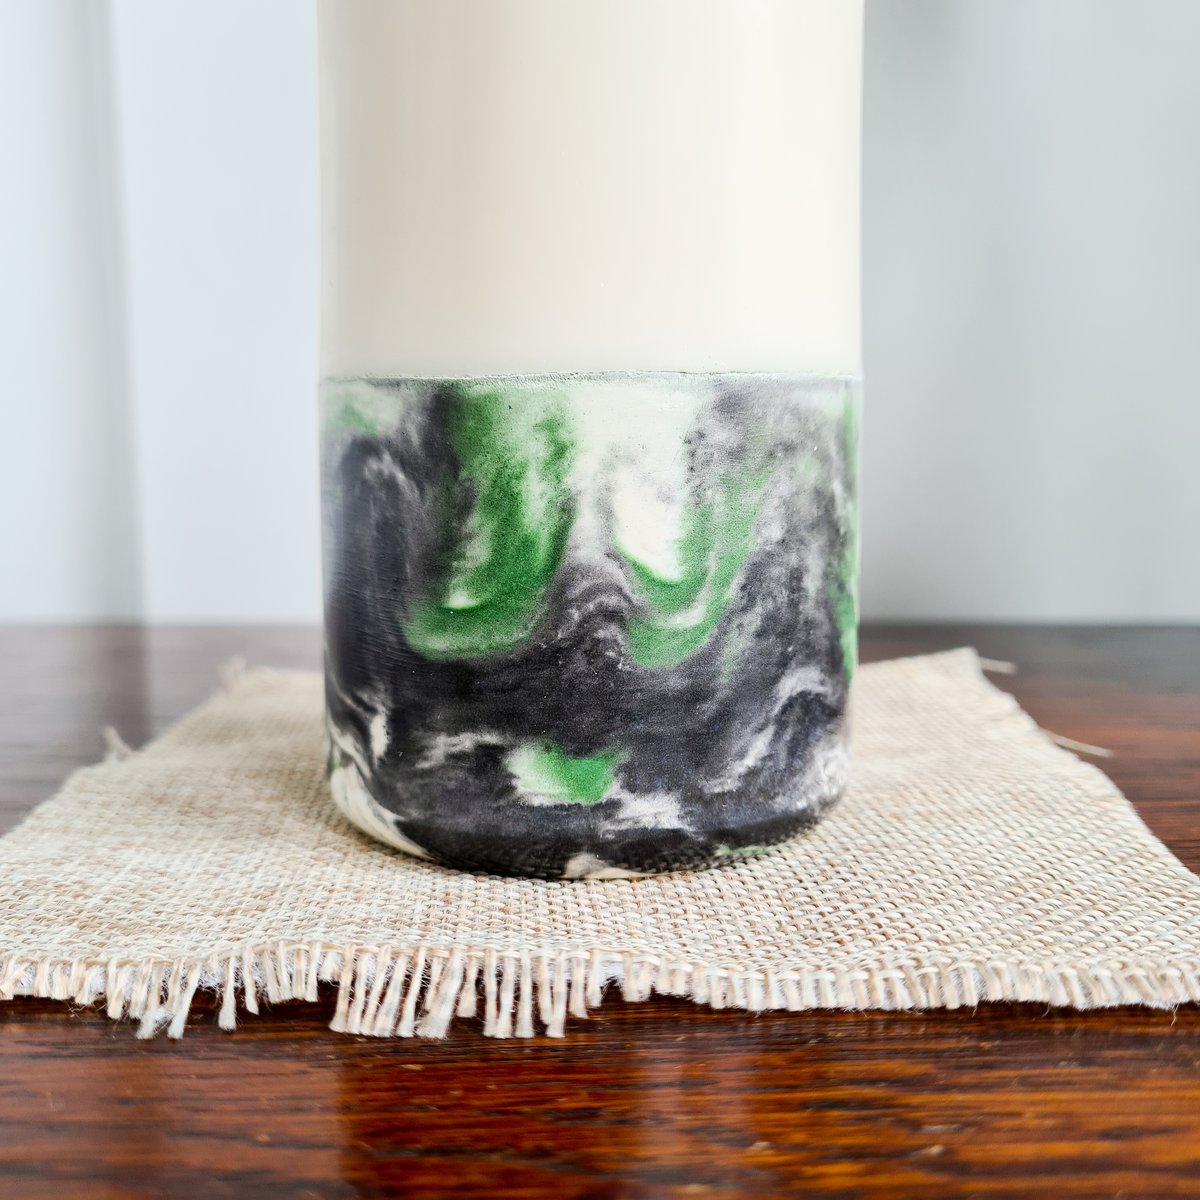 Marble Concrete Candle - Black & Green